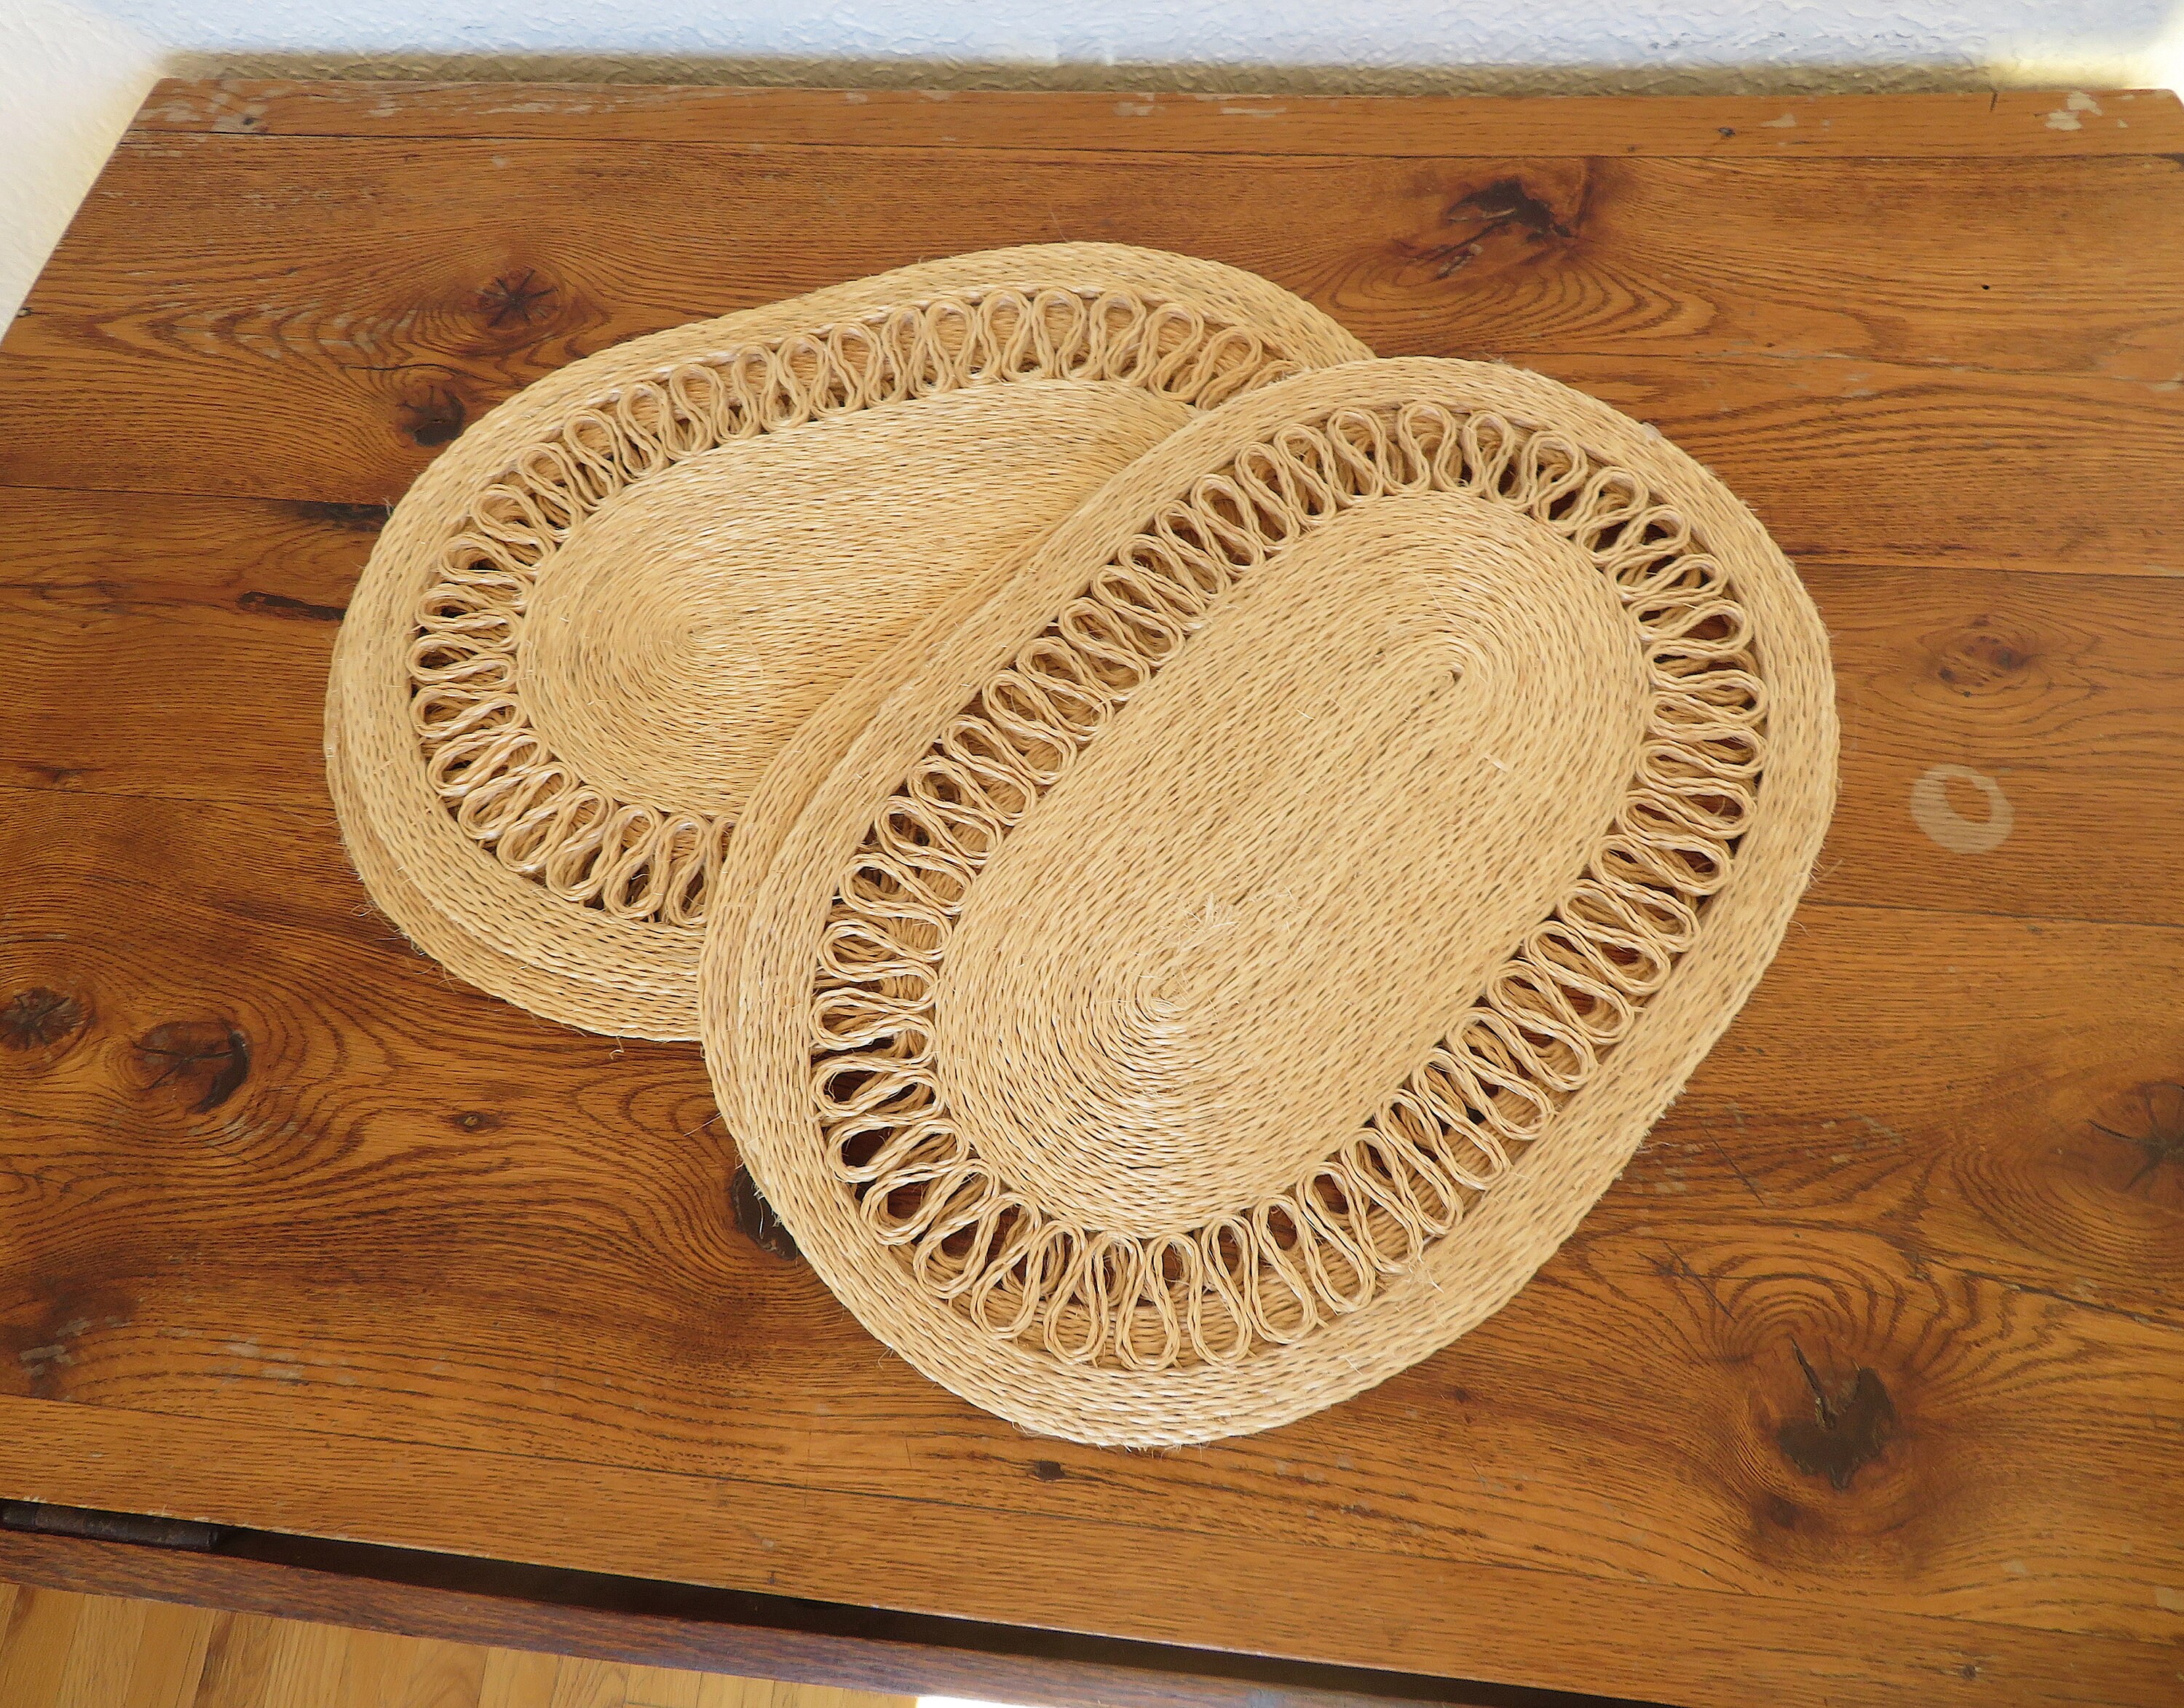 Vintage 1960s Coiled Jute Placemats Boho Chic Natural Fiber Table Mats Set  of 6